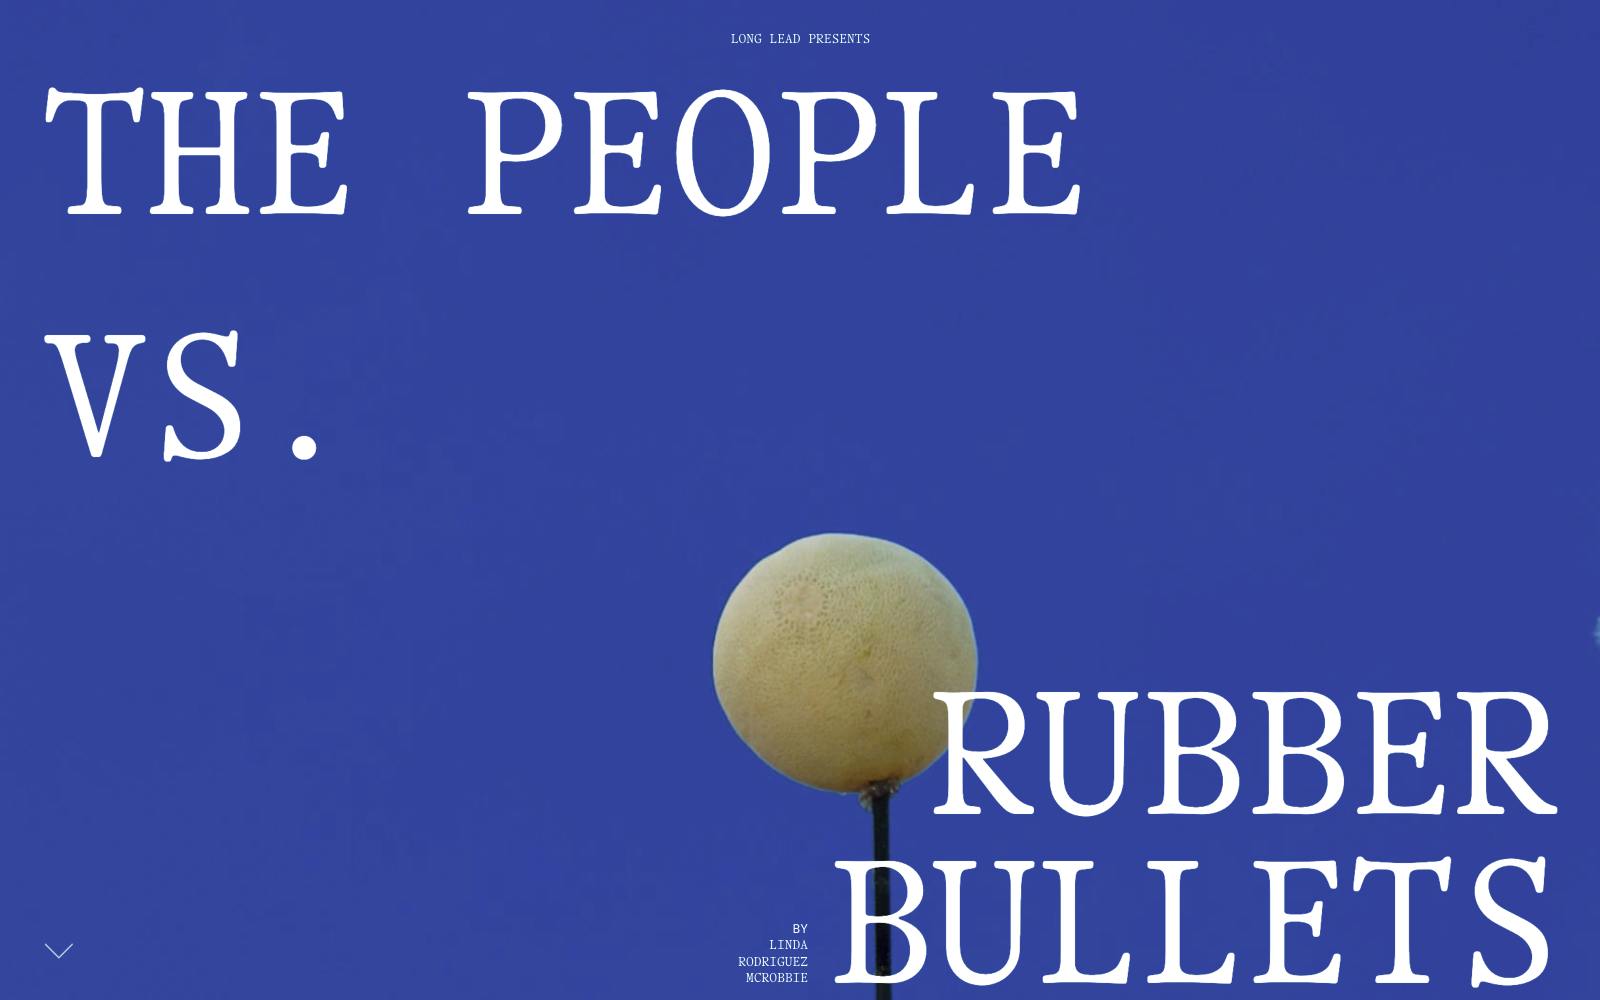 Screen recording of the Rubber Bullets homepage.